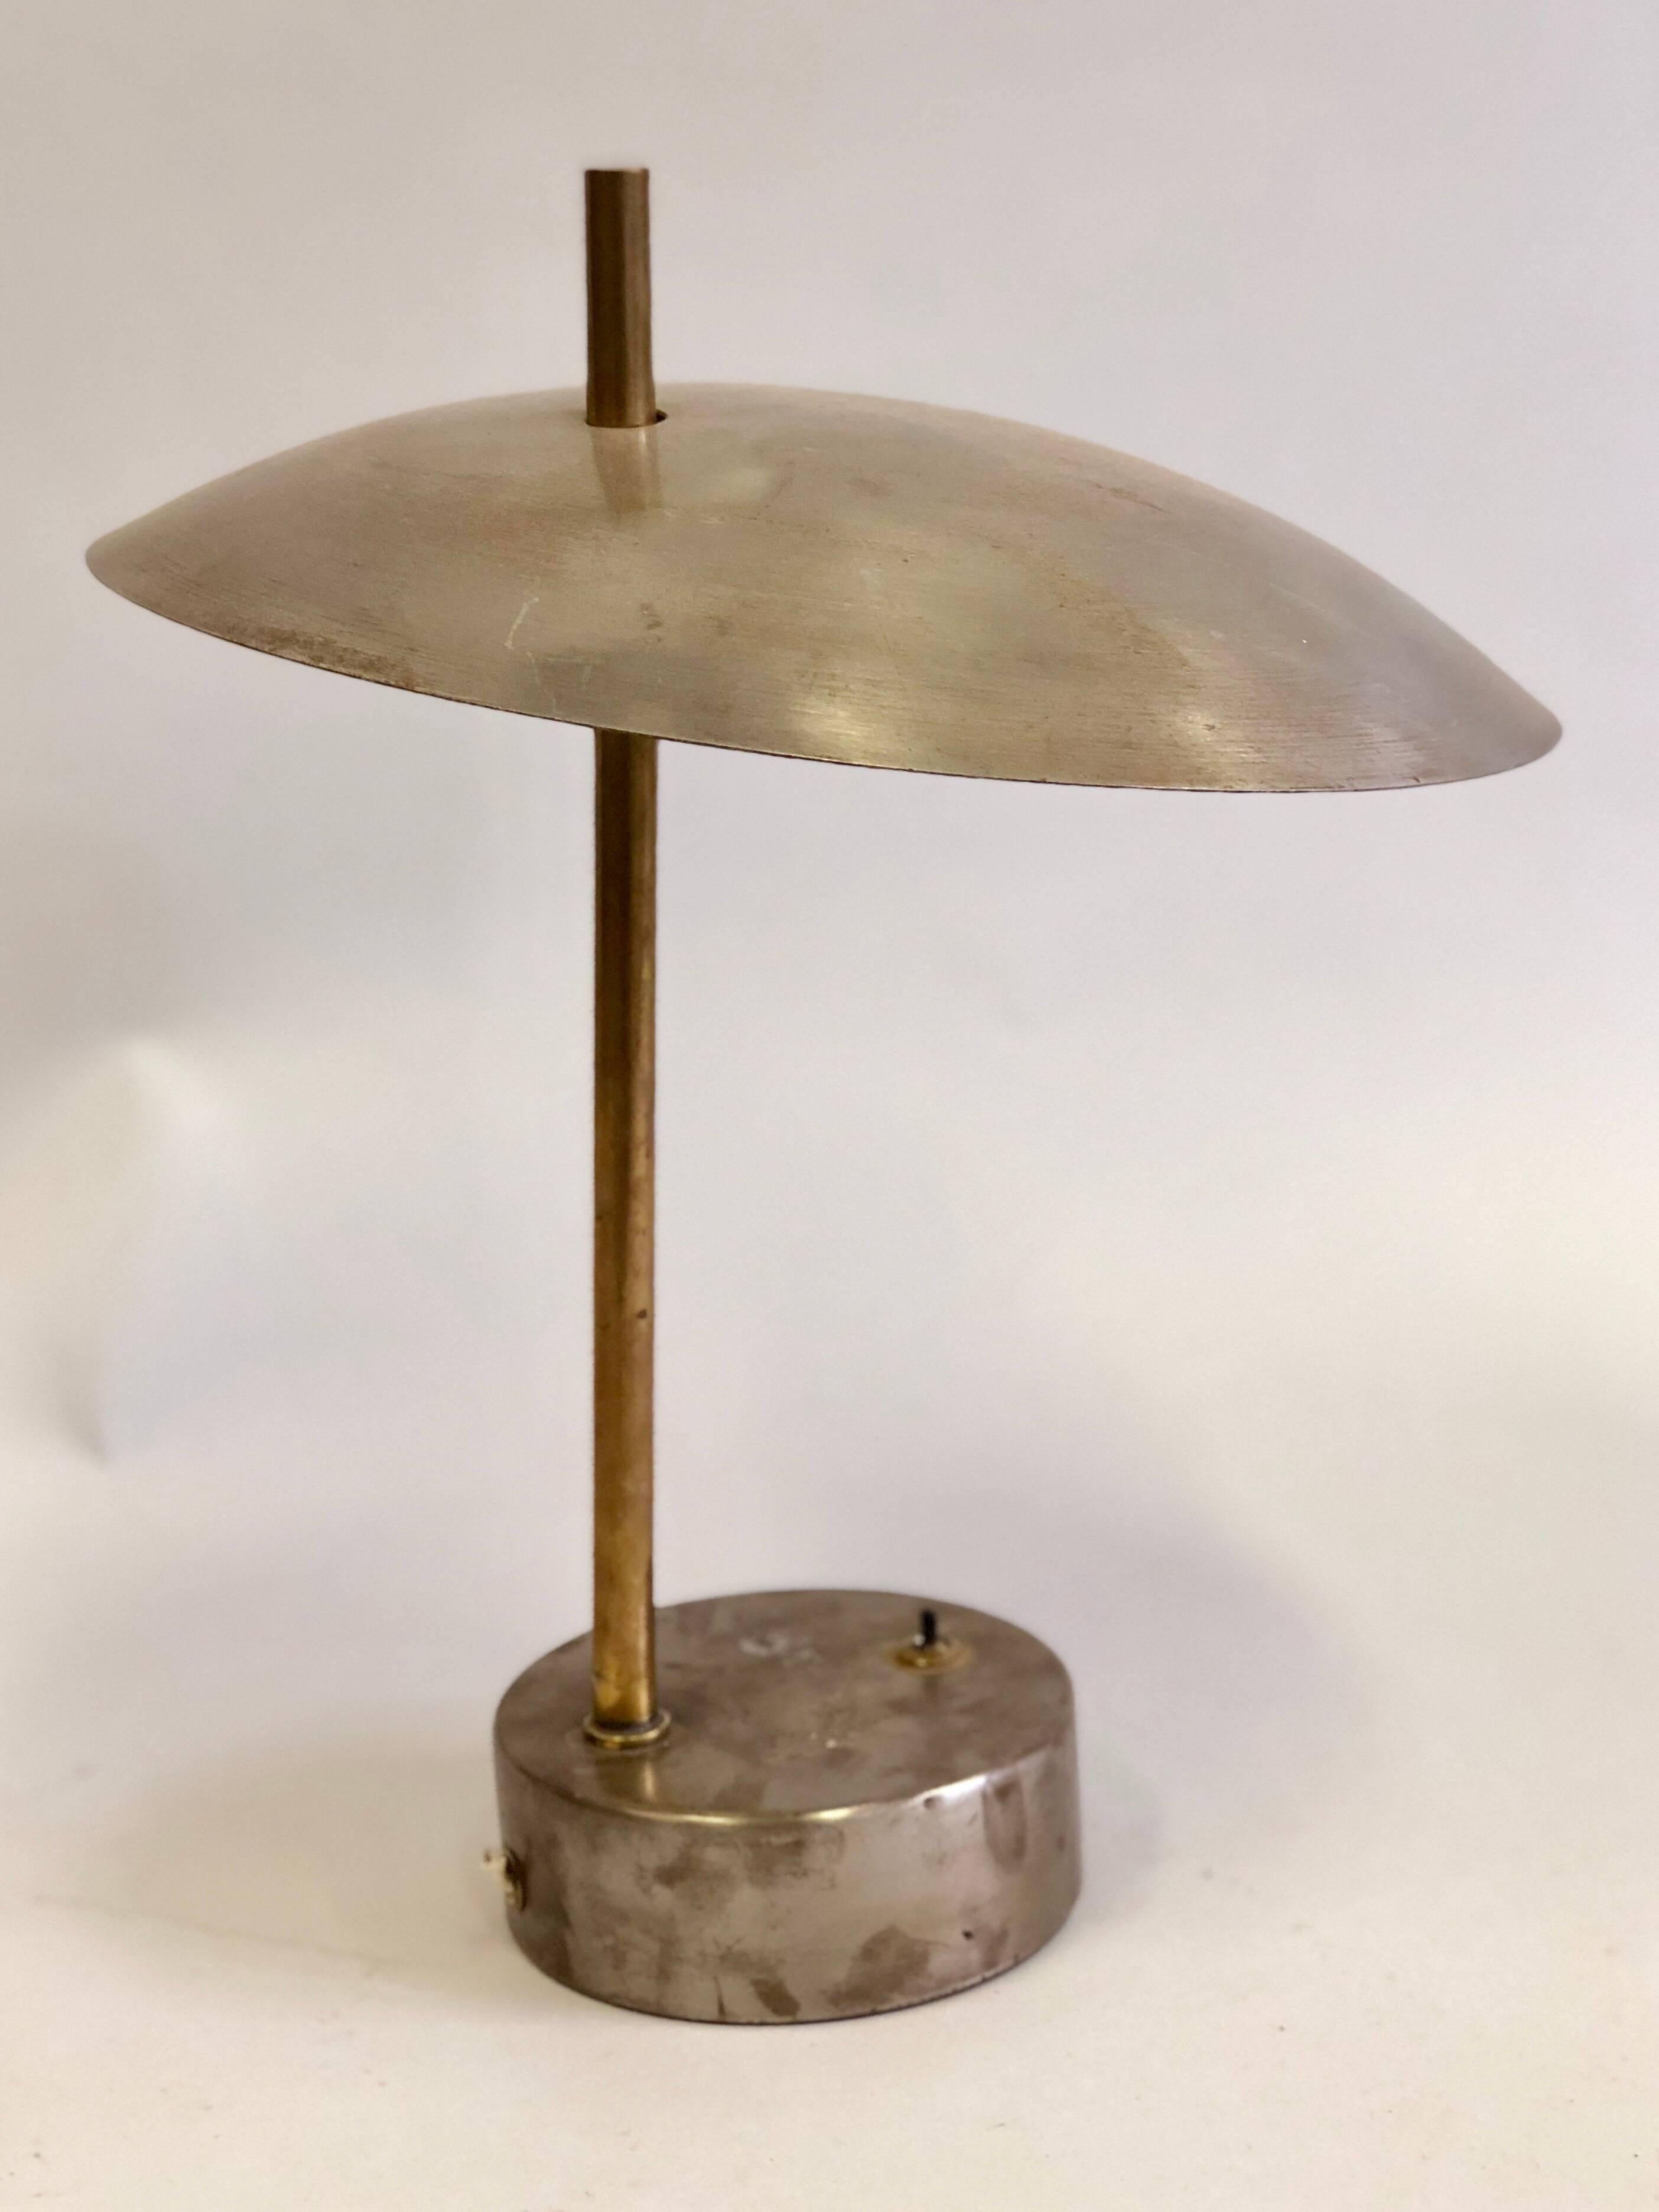 Pair of Mid-Century Modern Industrial Steel and Brass Desk or Table Lamps, 1950 1